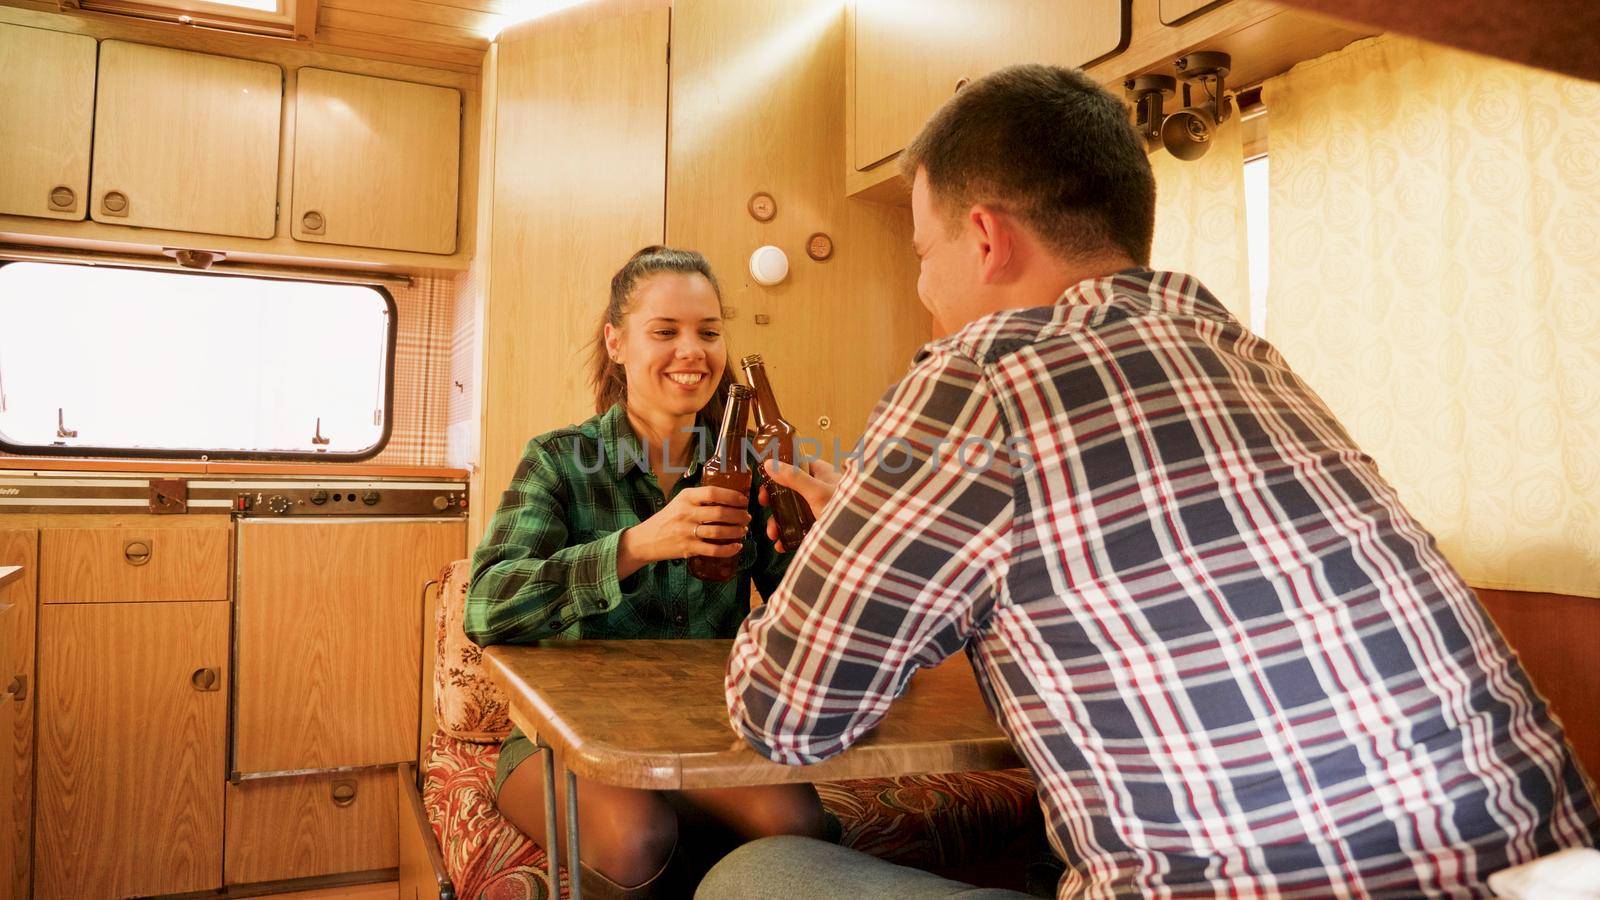 Husbnand making his wife laugh while she's holding a bottle of beer inside of their retro camper van.